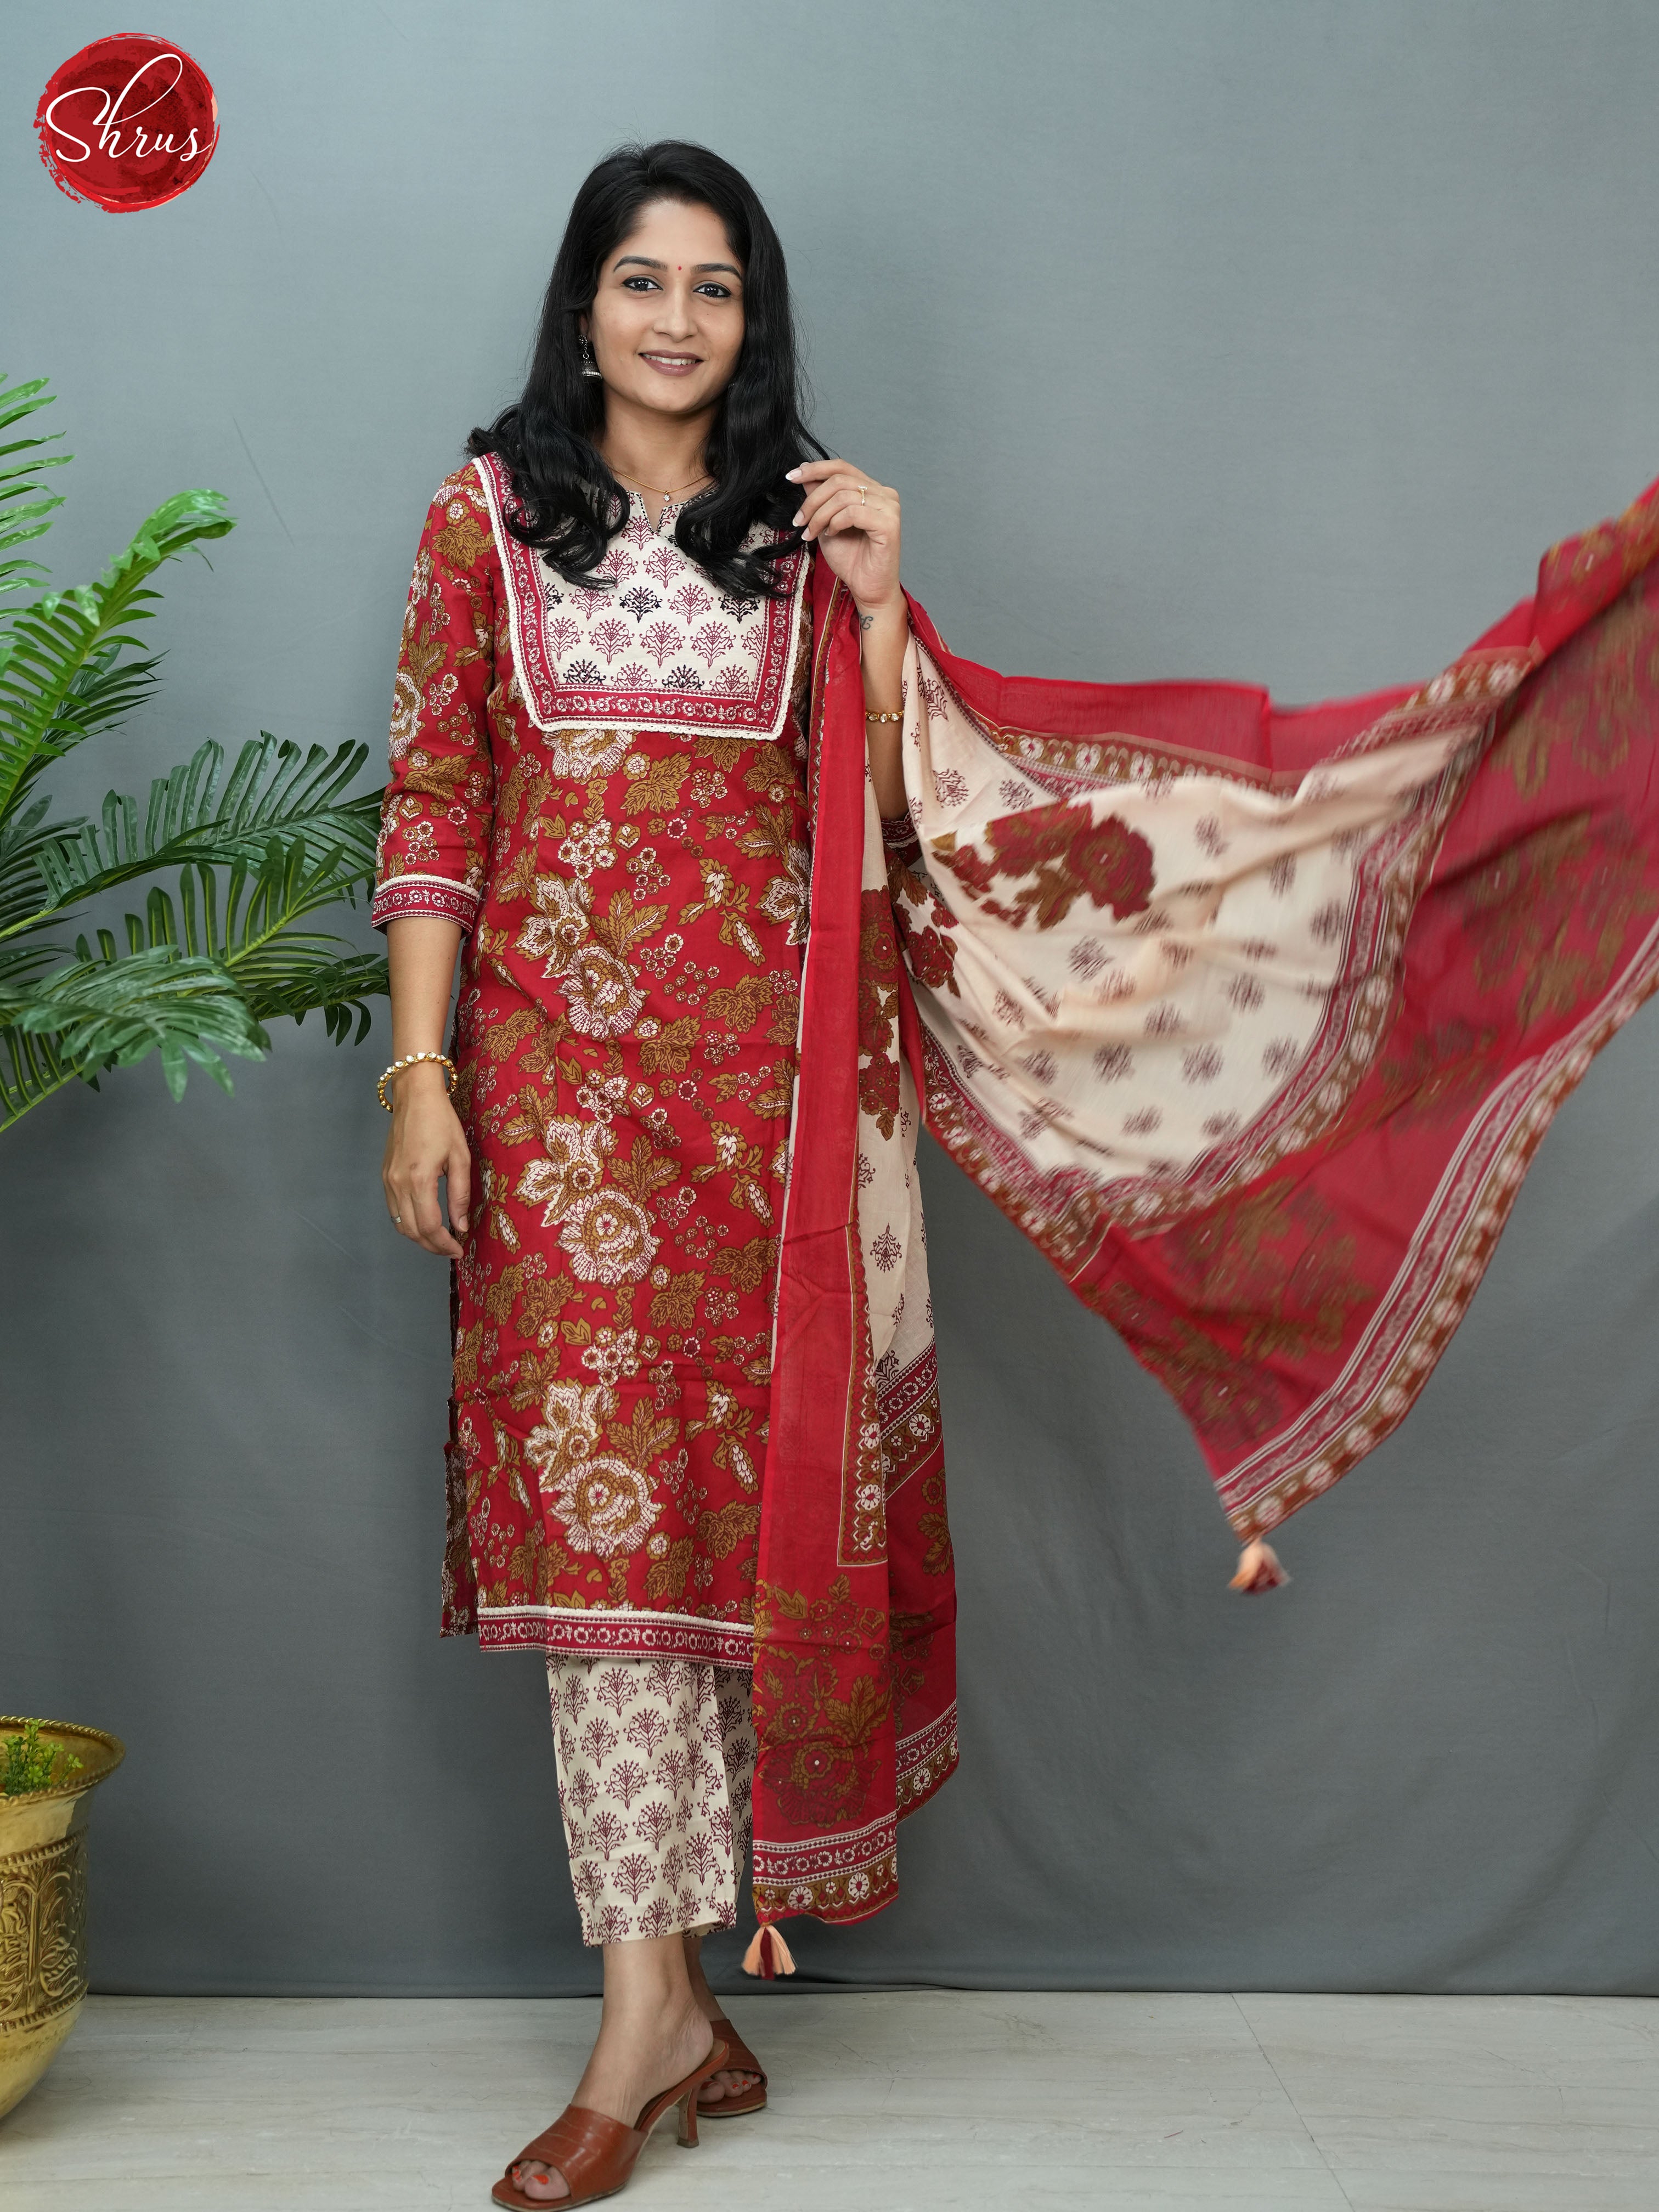 Red and White -  Floral printed Readymade Salwar - Shop on ShrusEternity.com